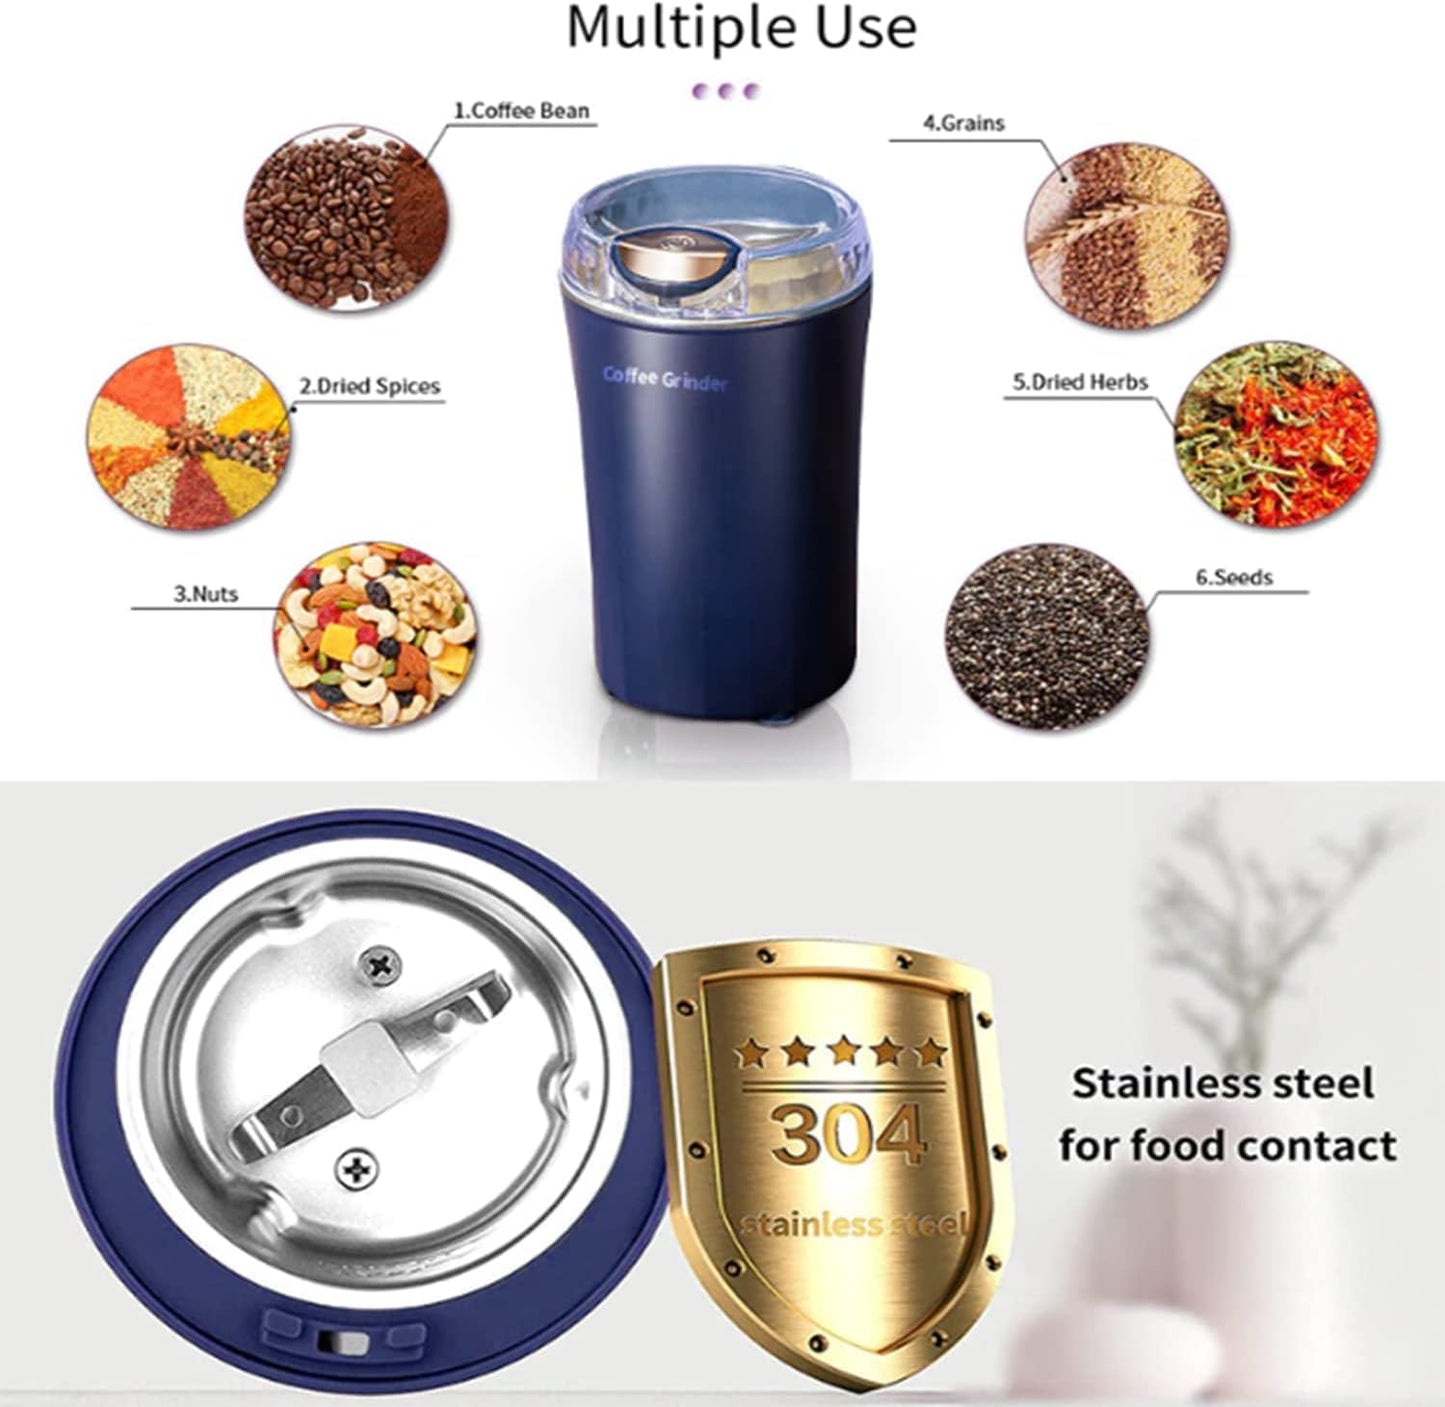 Electric Kitchen Grinder Mixer - Electric Coffee Grinders for Spices, Seeds, Herbs, and Coffee Beans, Spice Blender and Espresso Grinder, Wet and Dry Grinder Stainless Steel